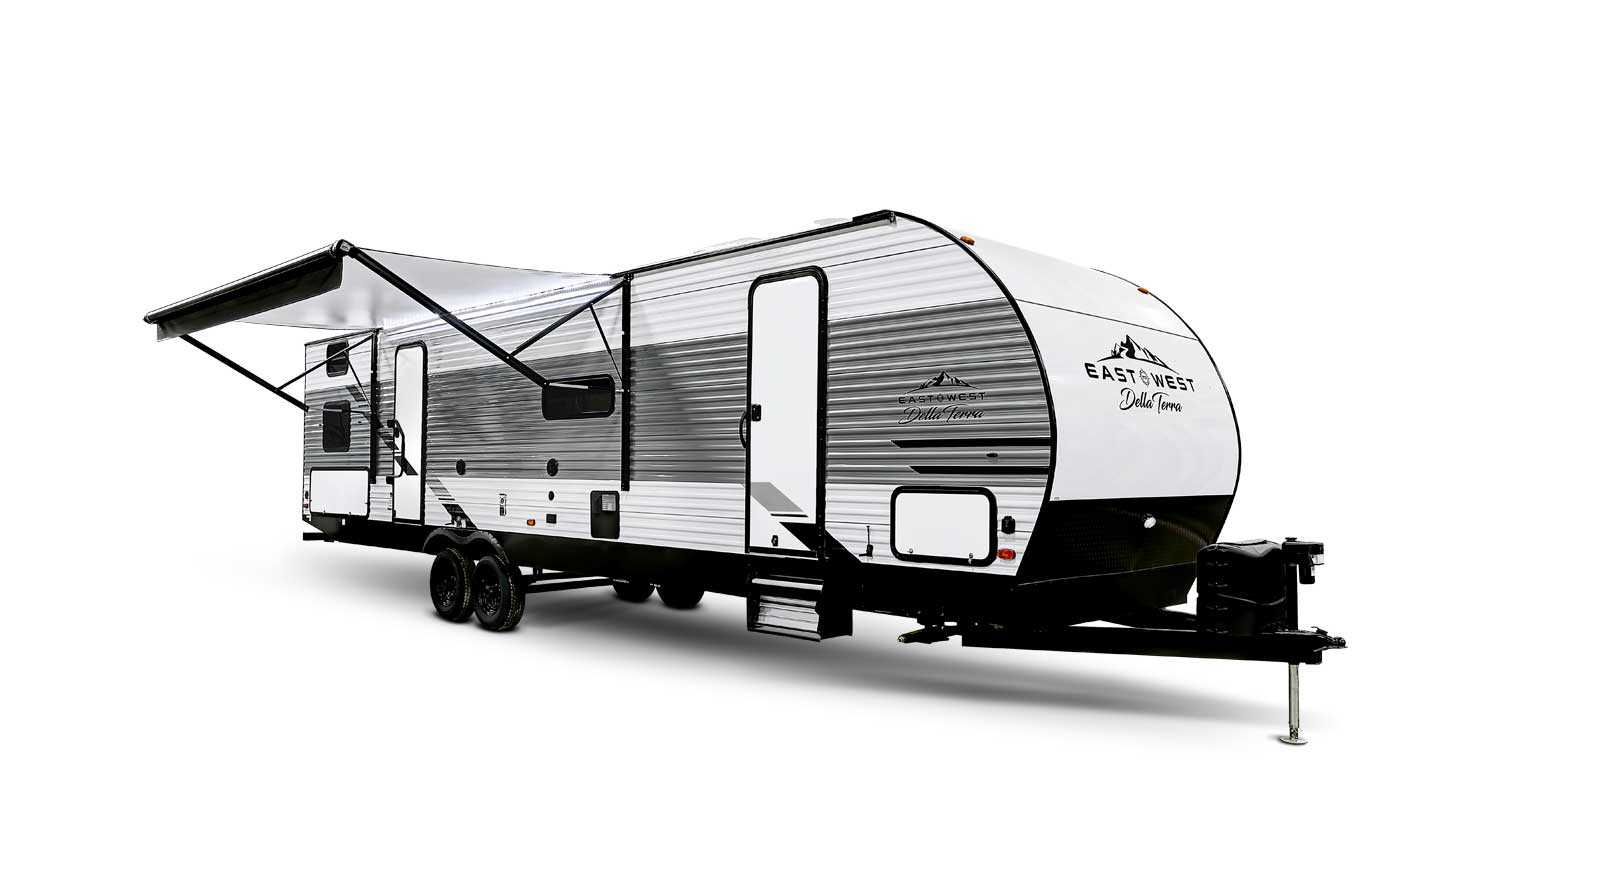 2022 East to West Della Terra TRAVEL TRAILERS featured